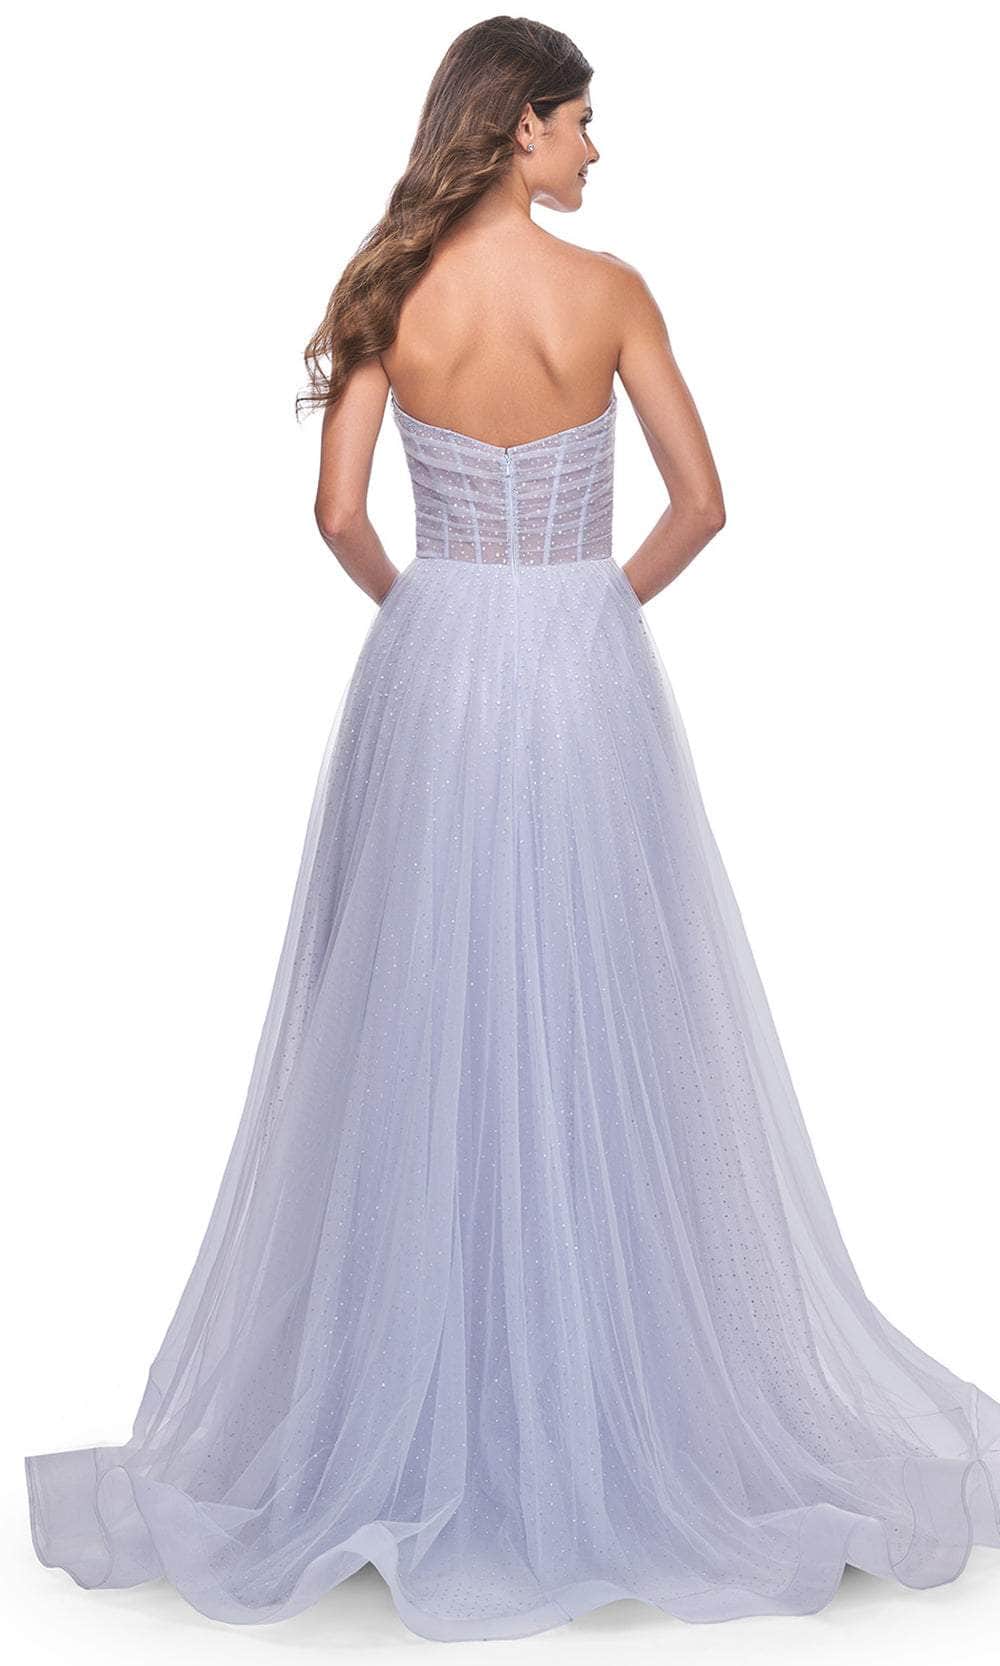 La Femme 31997 - Sweetheart Corset Prom Dress Special Occasion Dresses